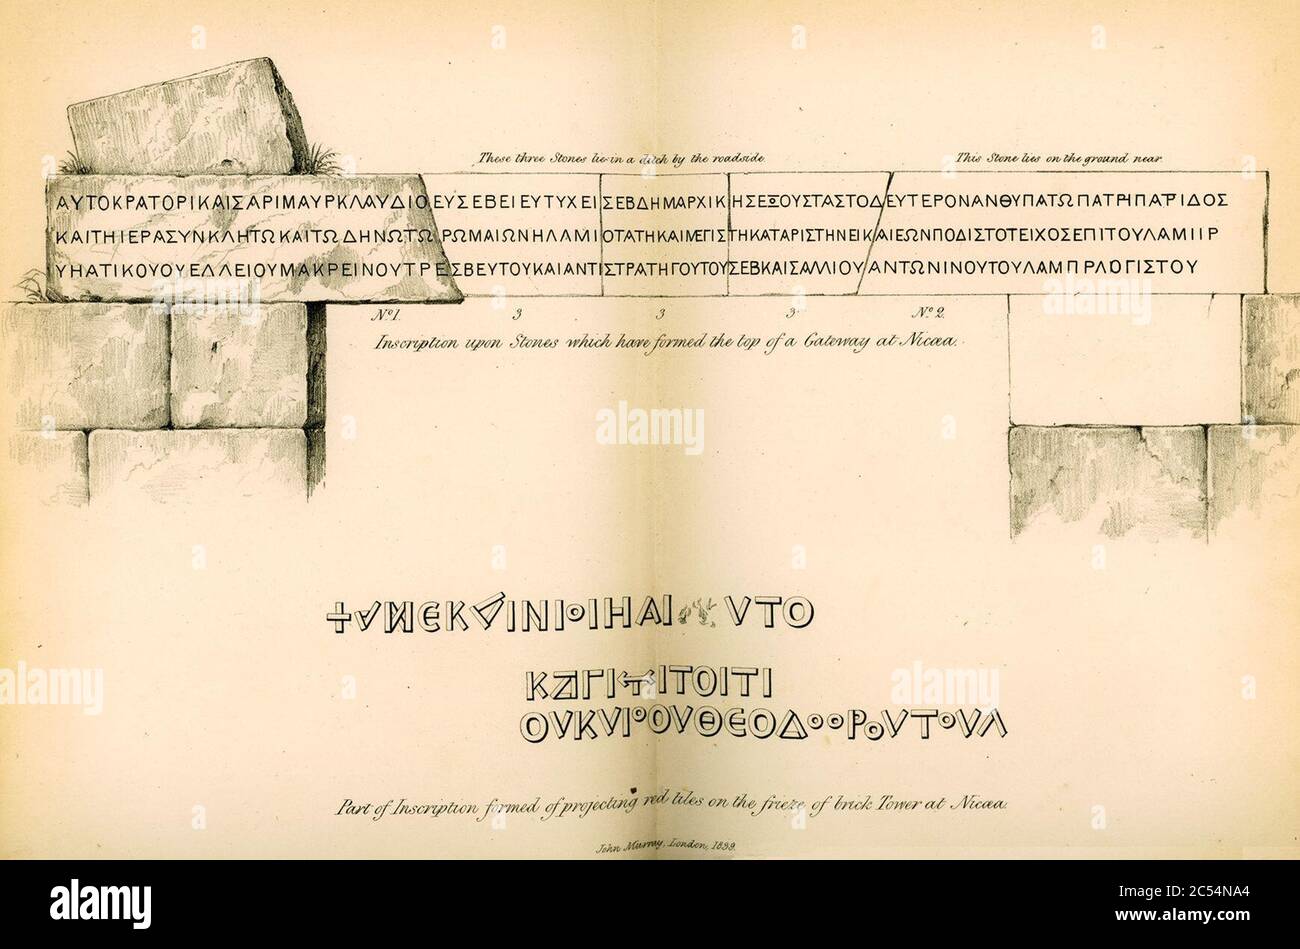 Inscription upon stones which have formed the top of a Gateway at Nicaea Part of inscription formed of projecting red ti - Fellows Charles - 1839. Stock Photo